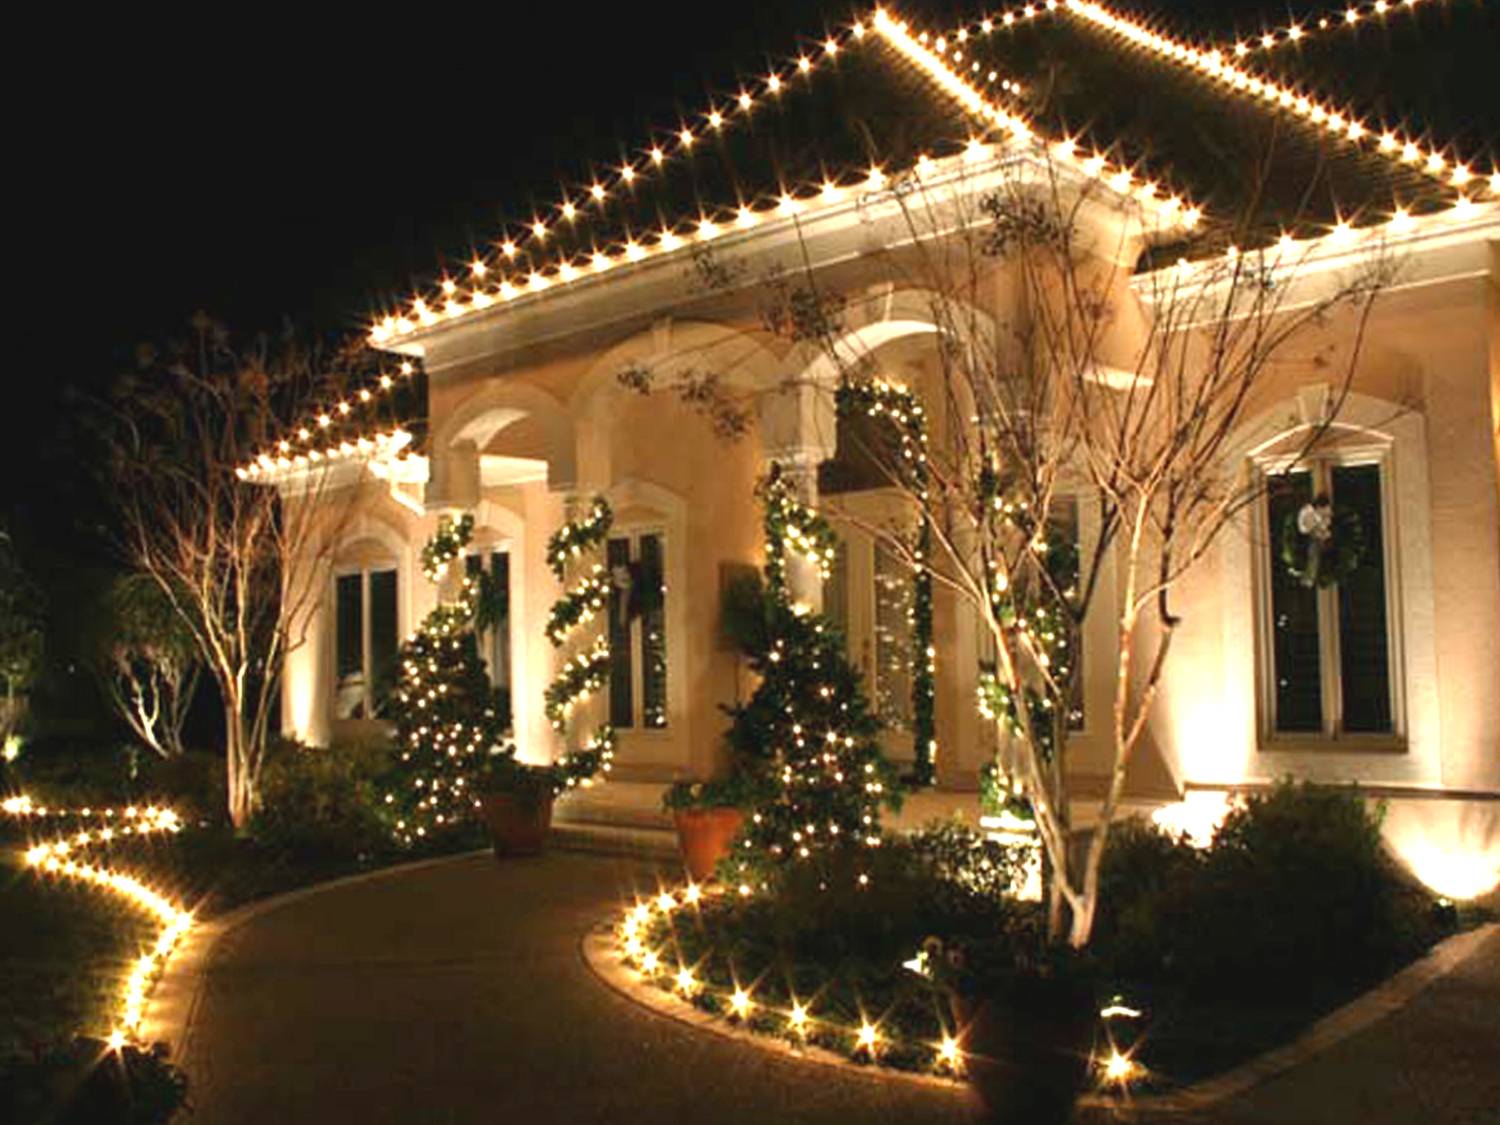 Colorado Homes and Commercial Properties Become Destinations with Christmas Lighting and Décor ...